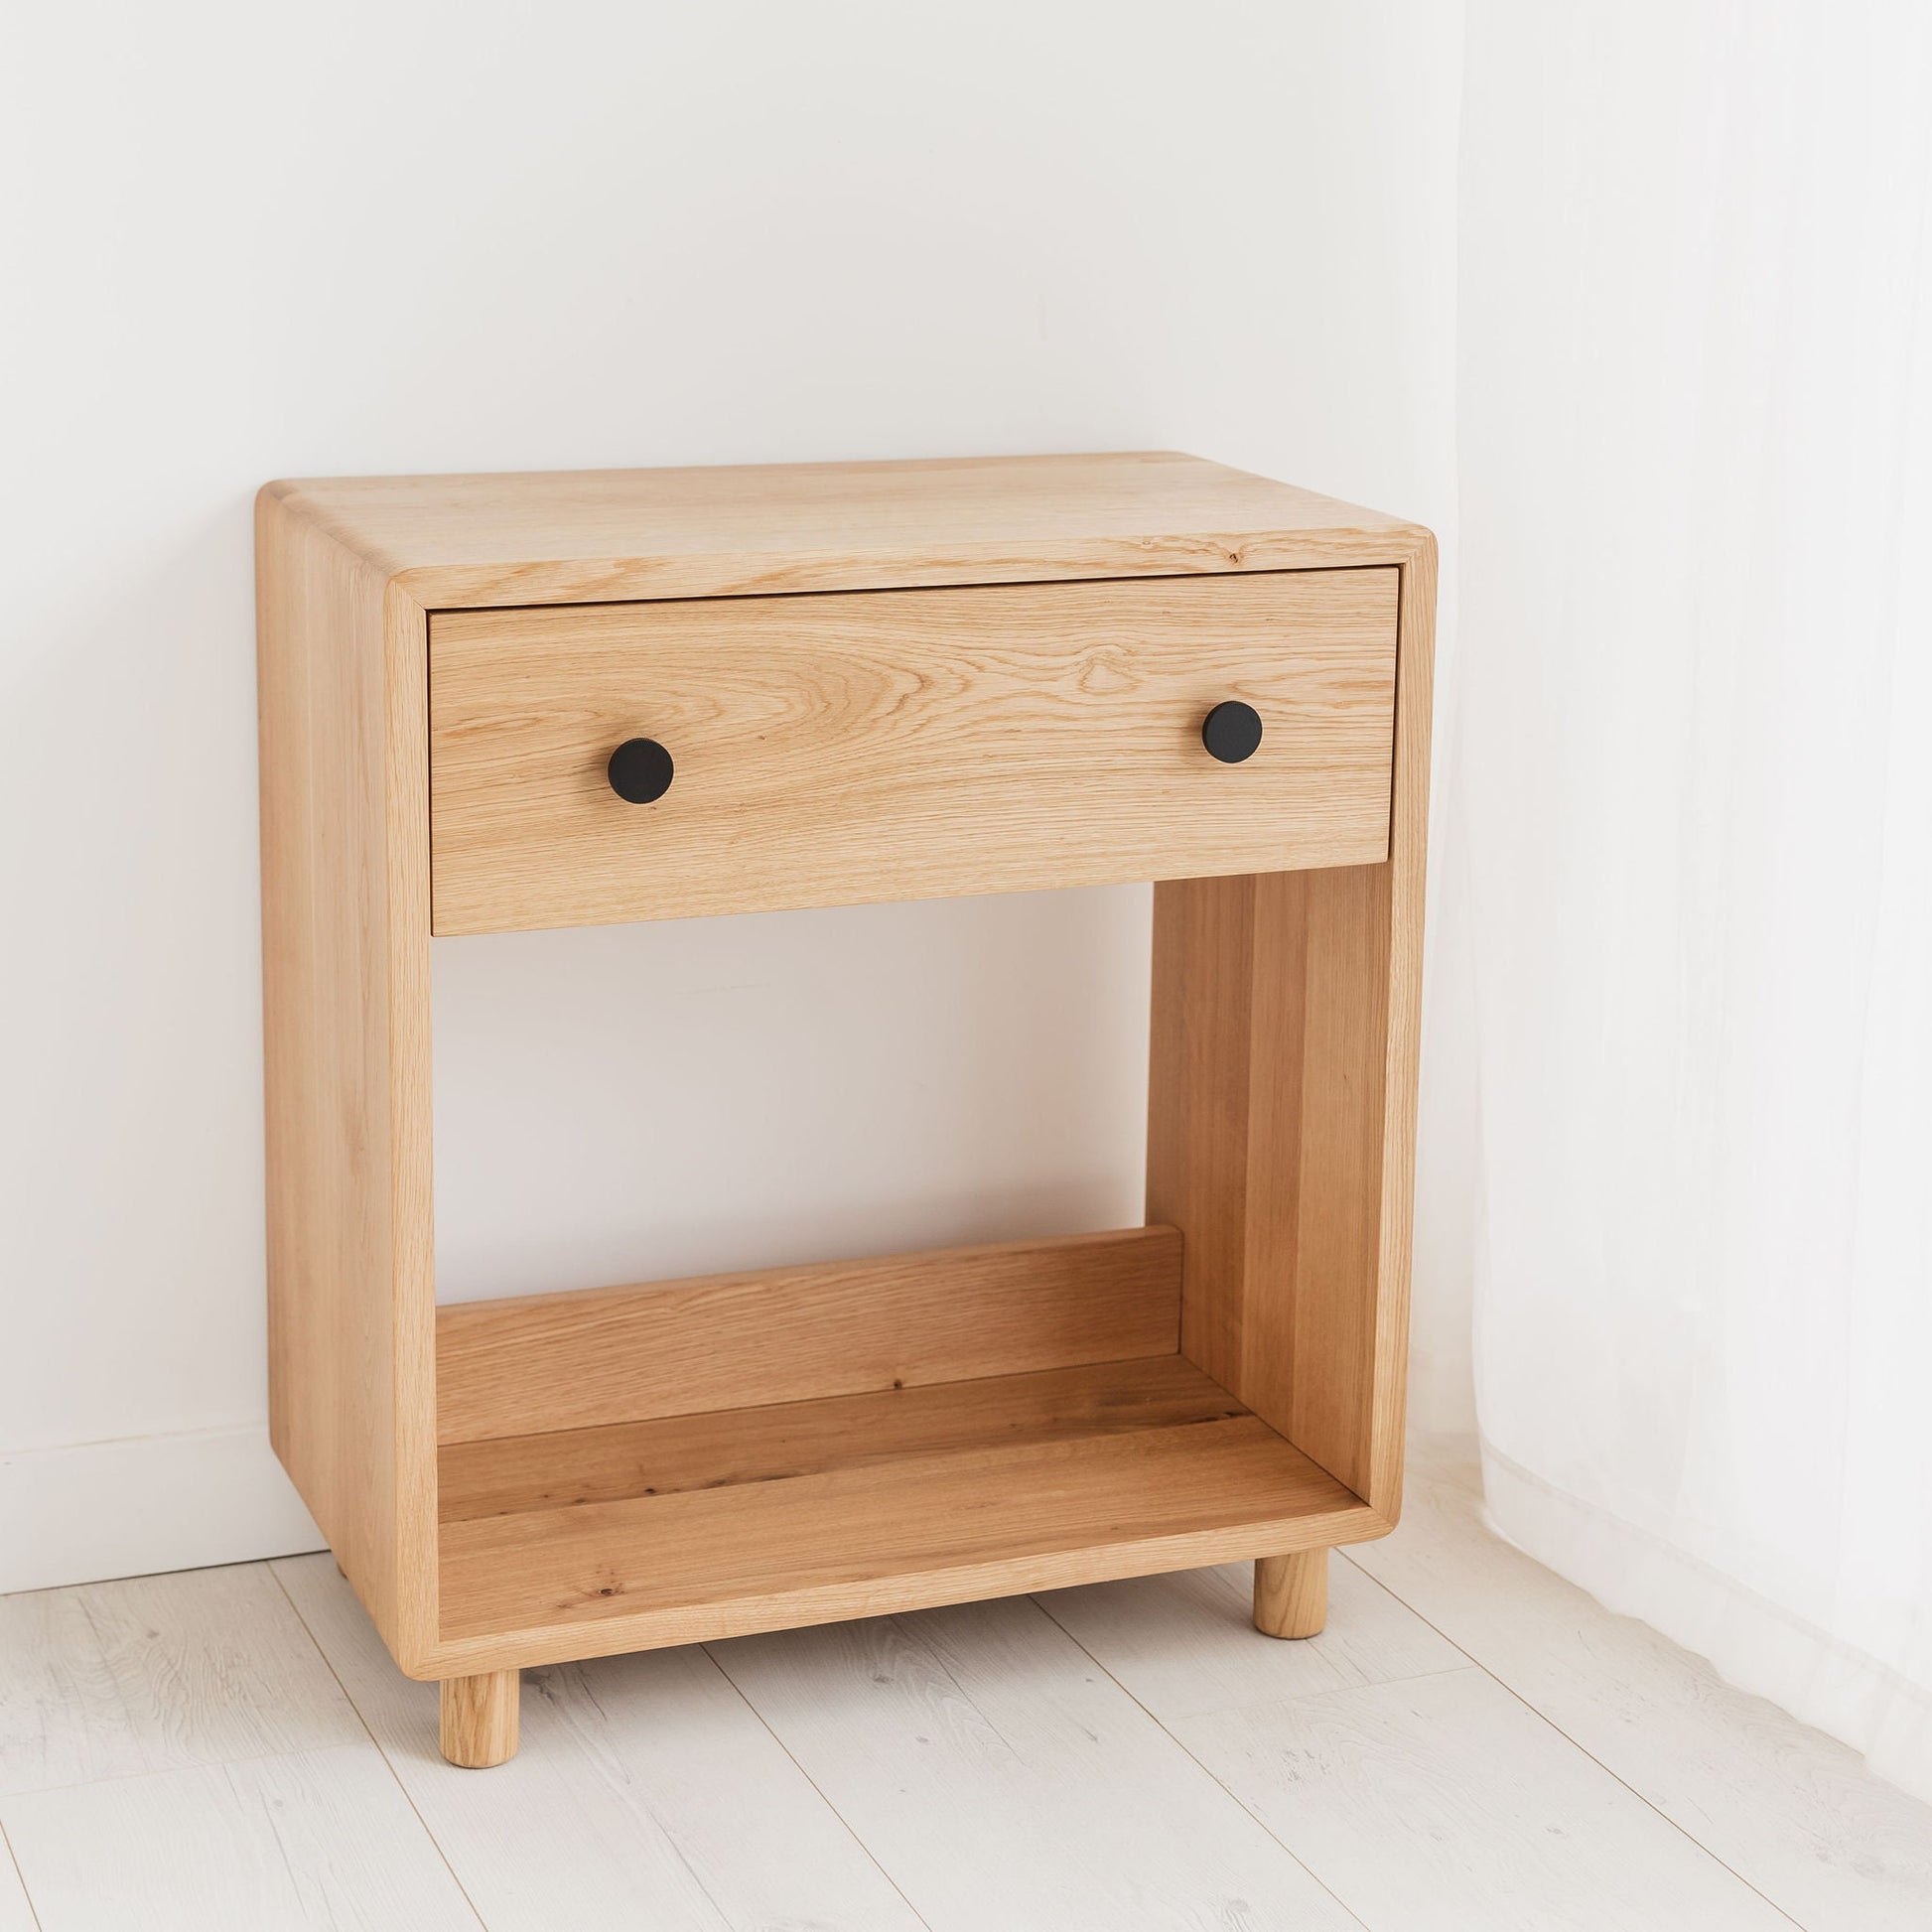 Solid Oak Bathroom Vanity Unit Wash Stand With Birch Plywood Drawer. Bespoke Custom Orders Available!